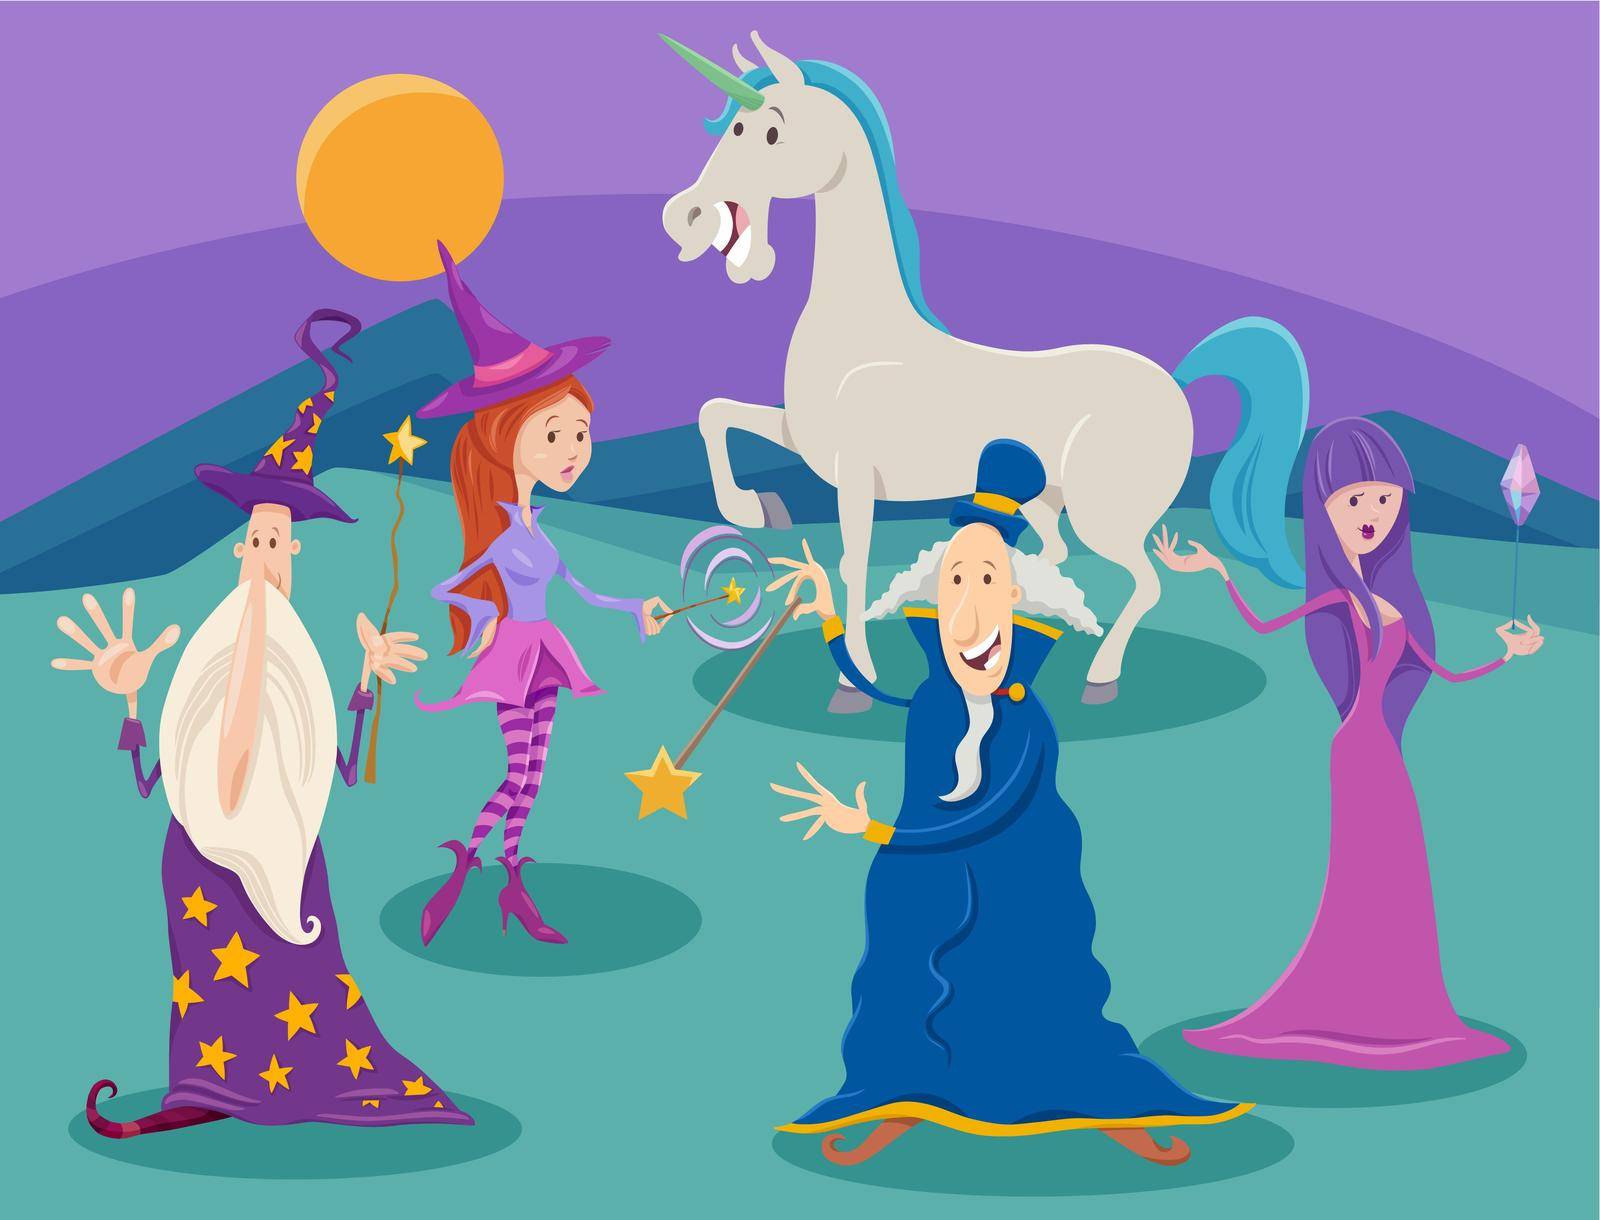 cartoon wizards and witches with unicorn fantasy characters by izakowski